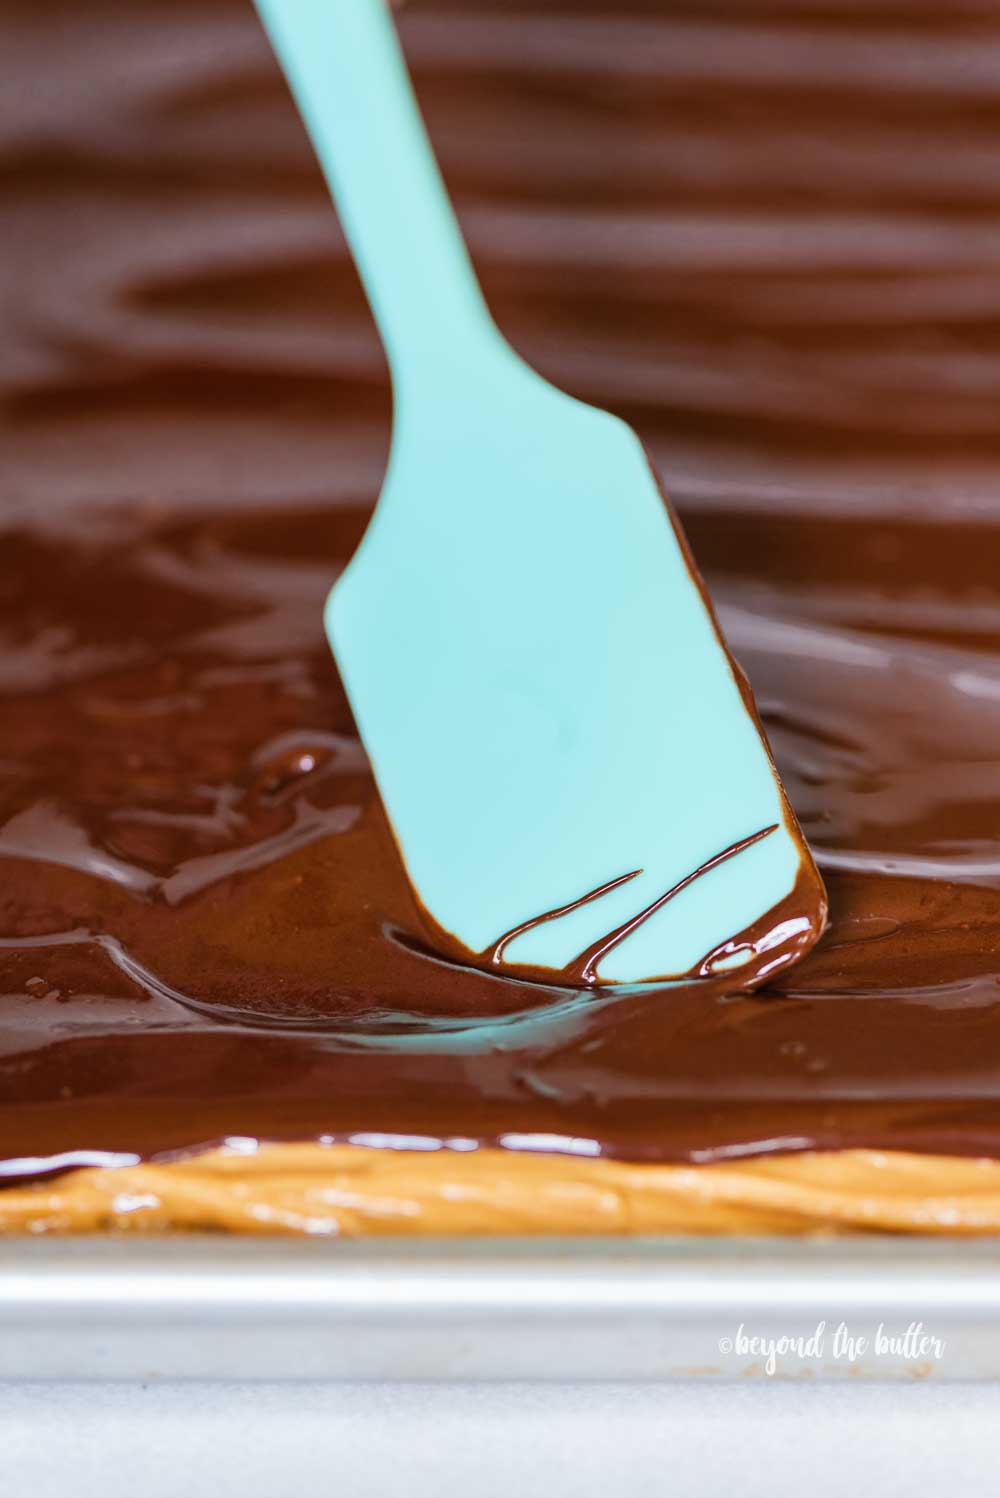 Angled view of blue spatula spreading chocolate over the top of peanut butter tandy kakes | All Images © Beyond the Butter™